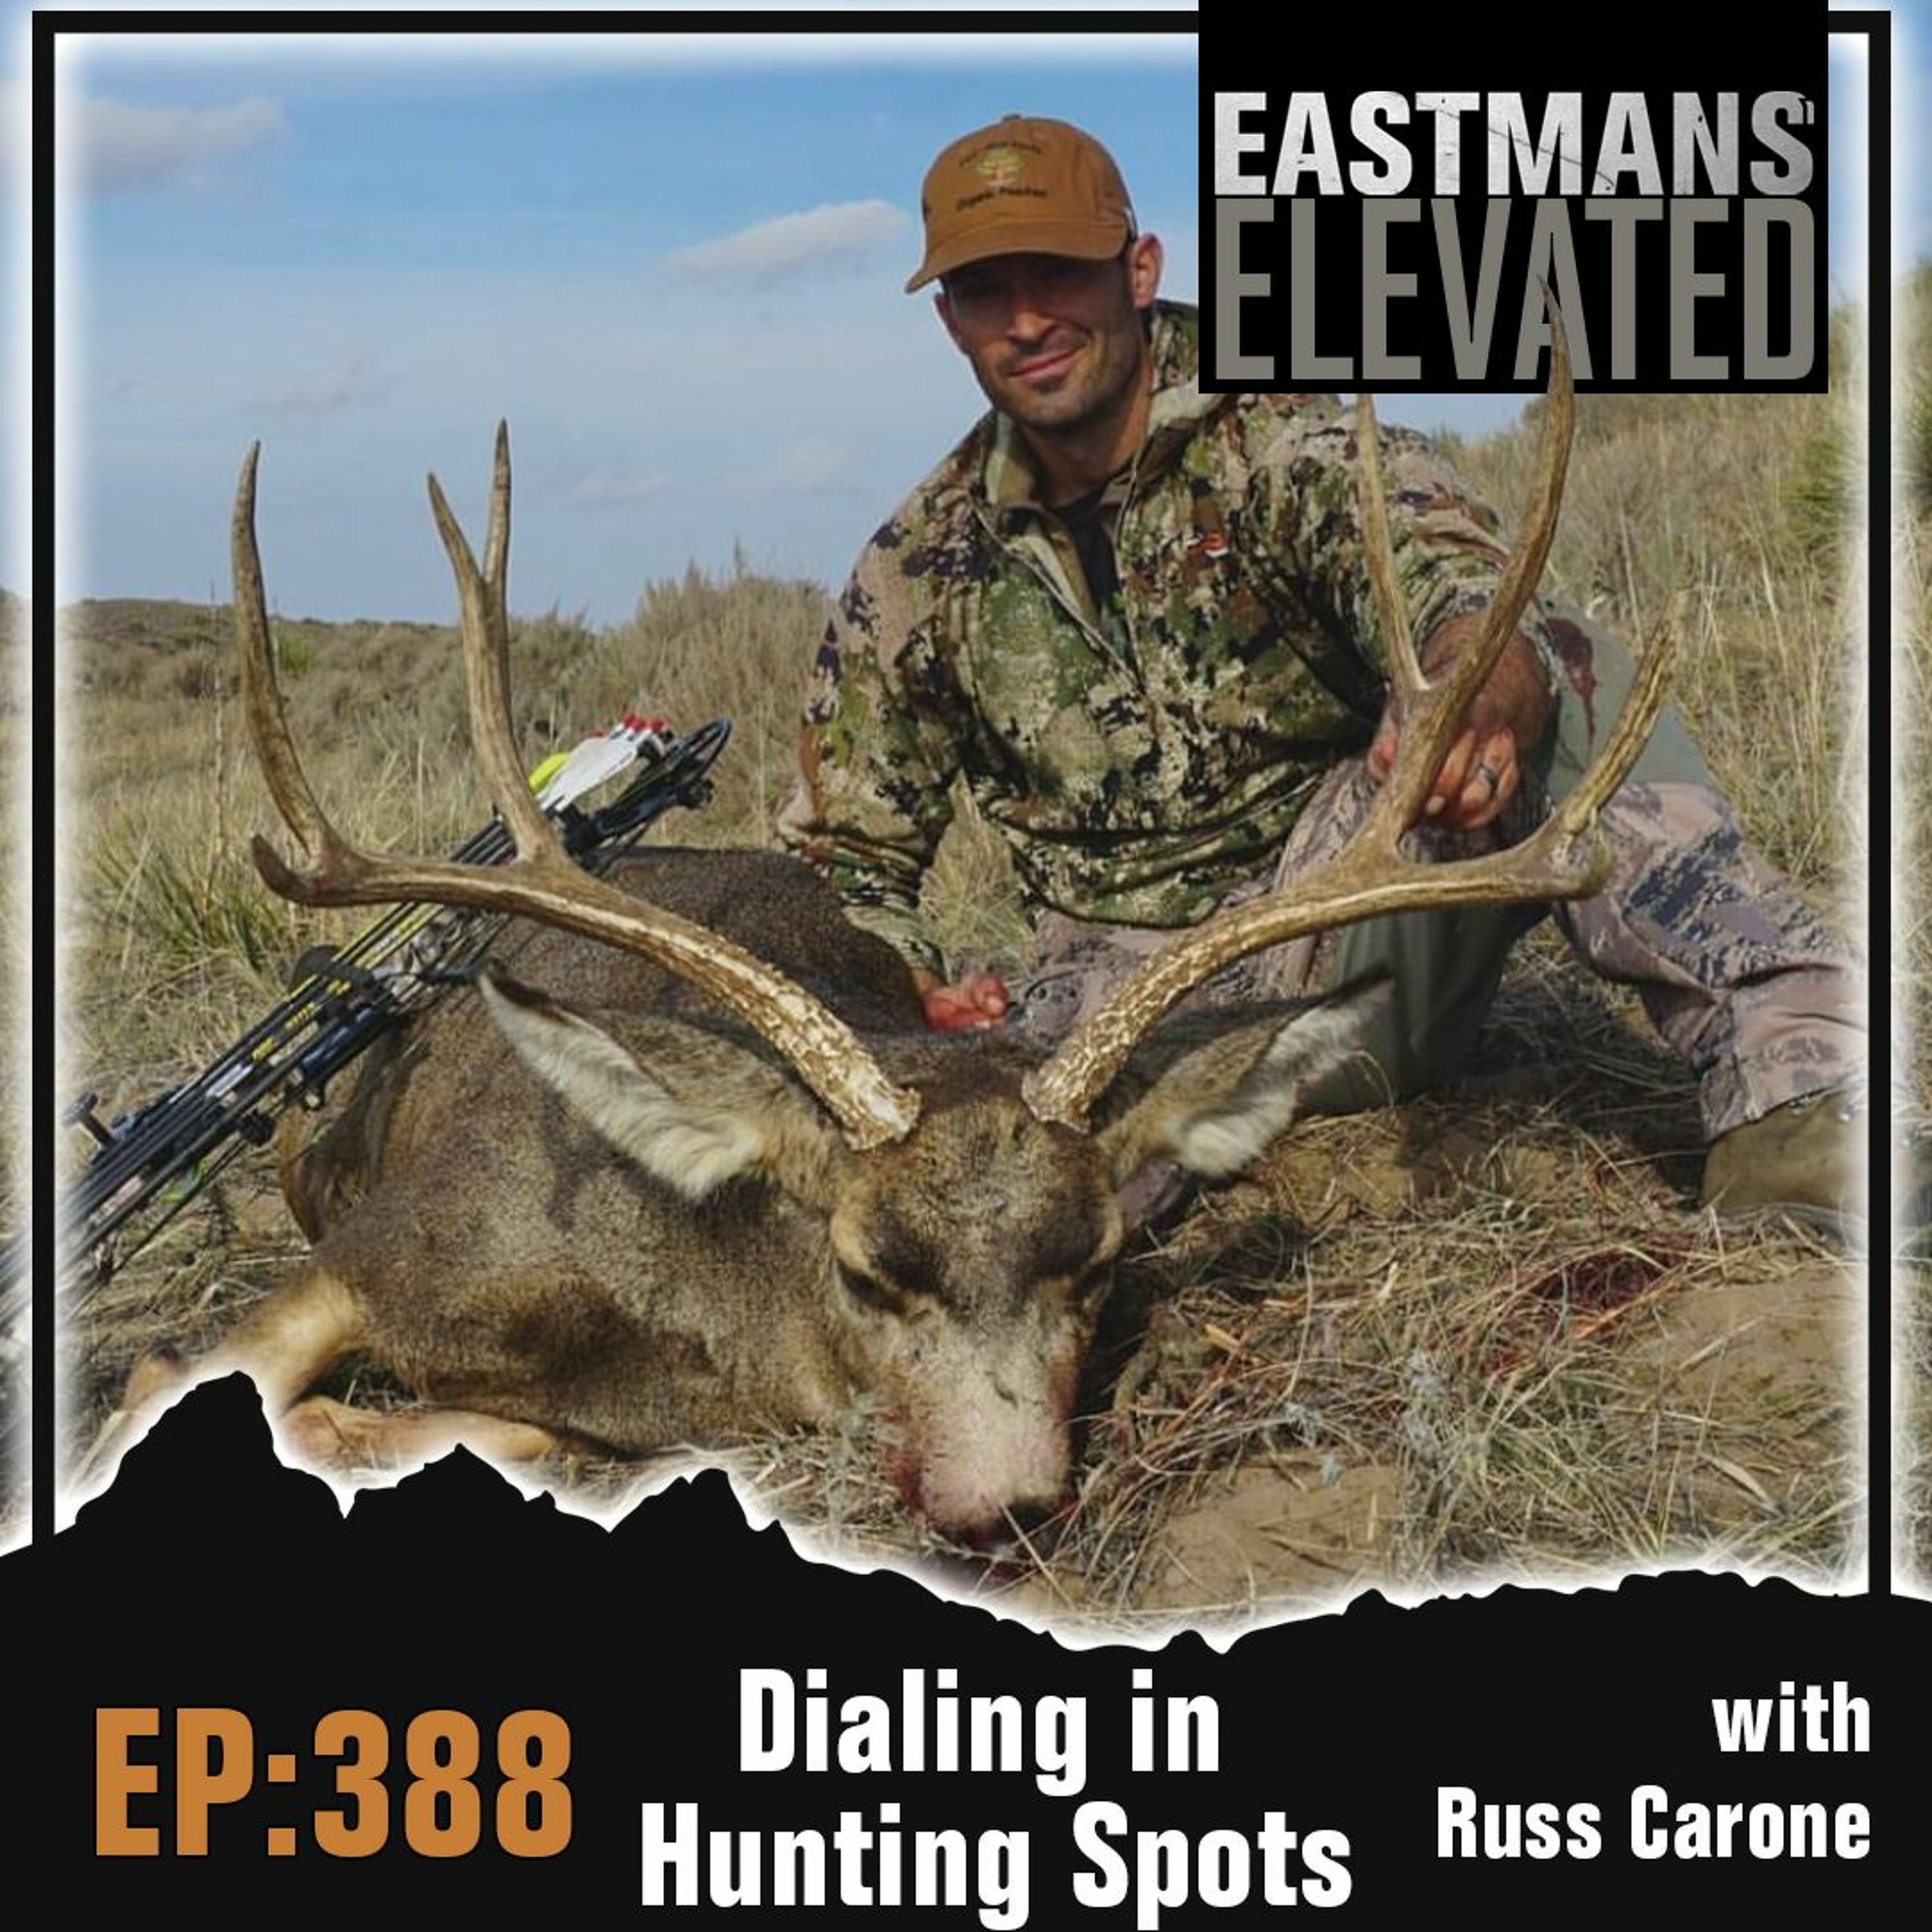 Episode 388: Dialing In Hunting Spots With Russ Carone